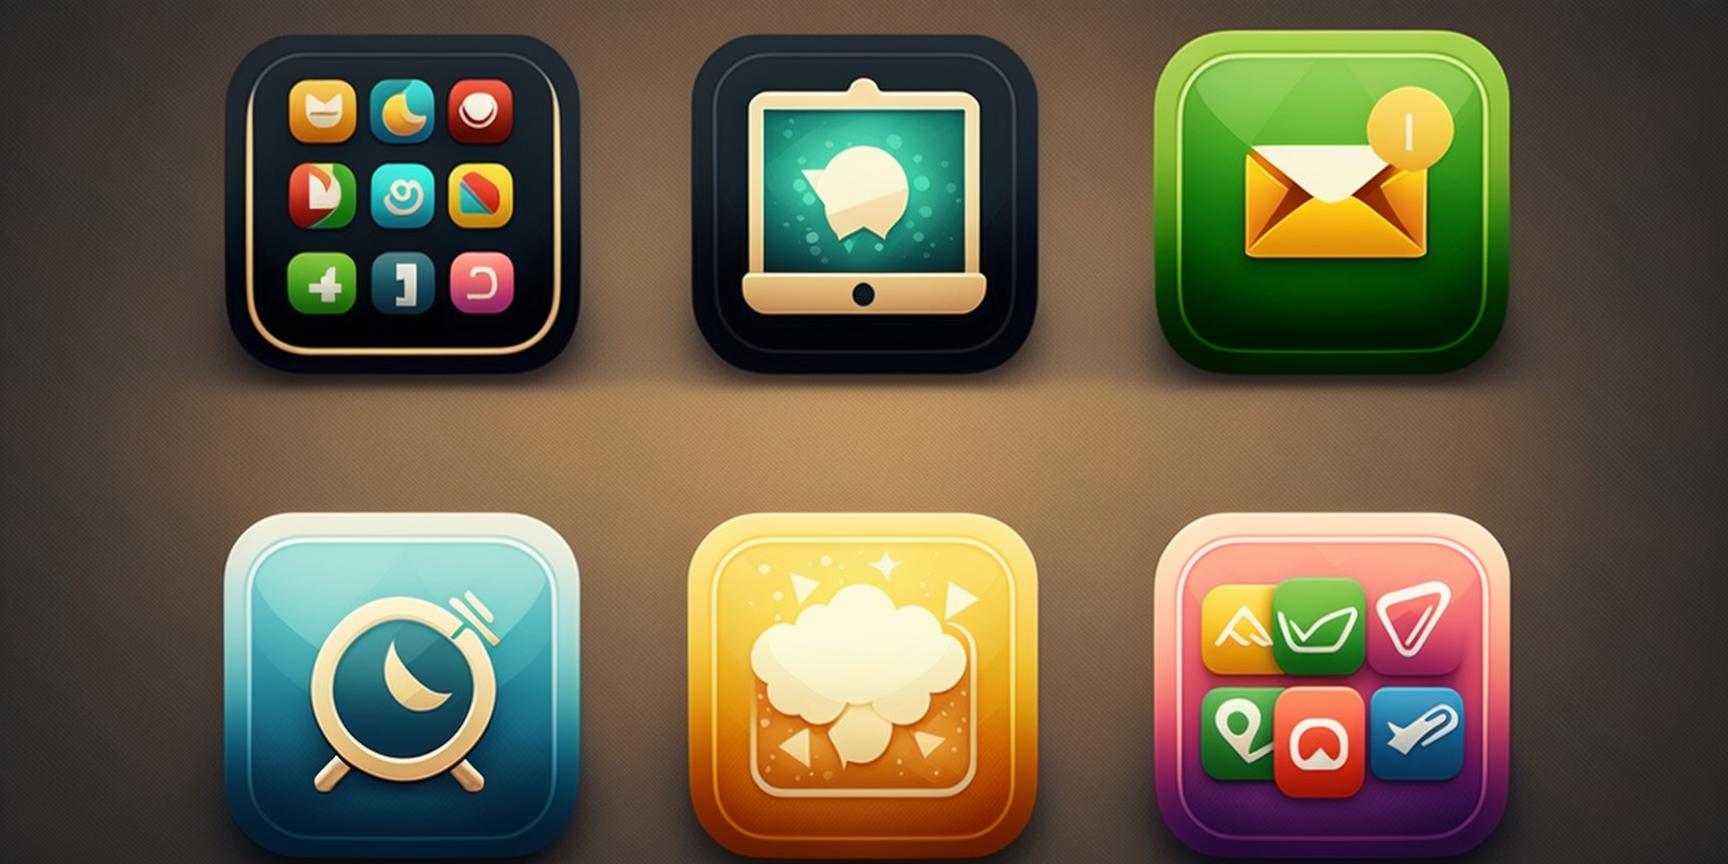 Tips to make a beautiful app icon cover image